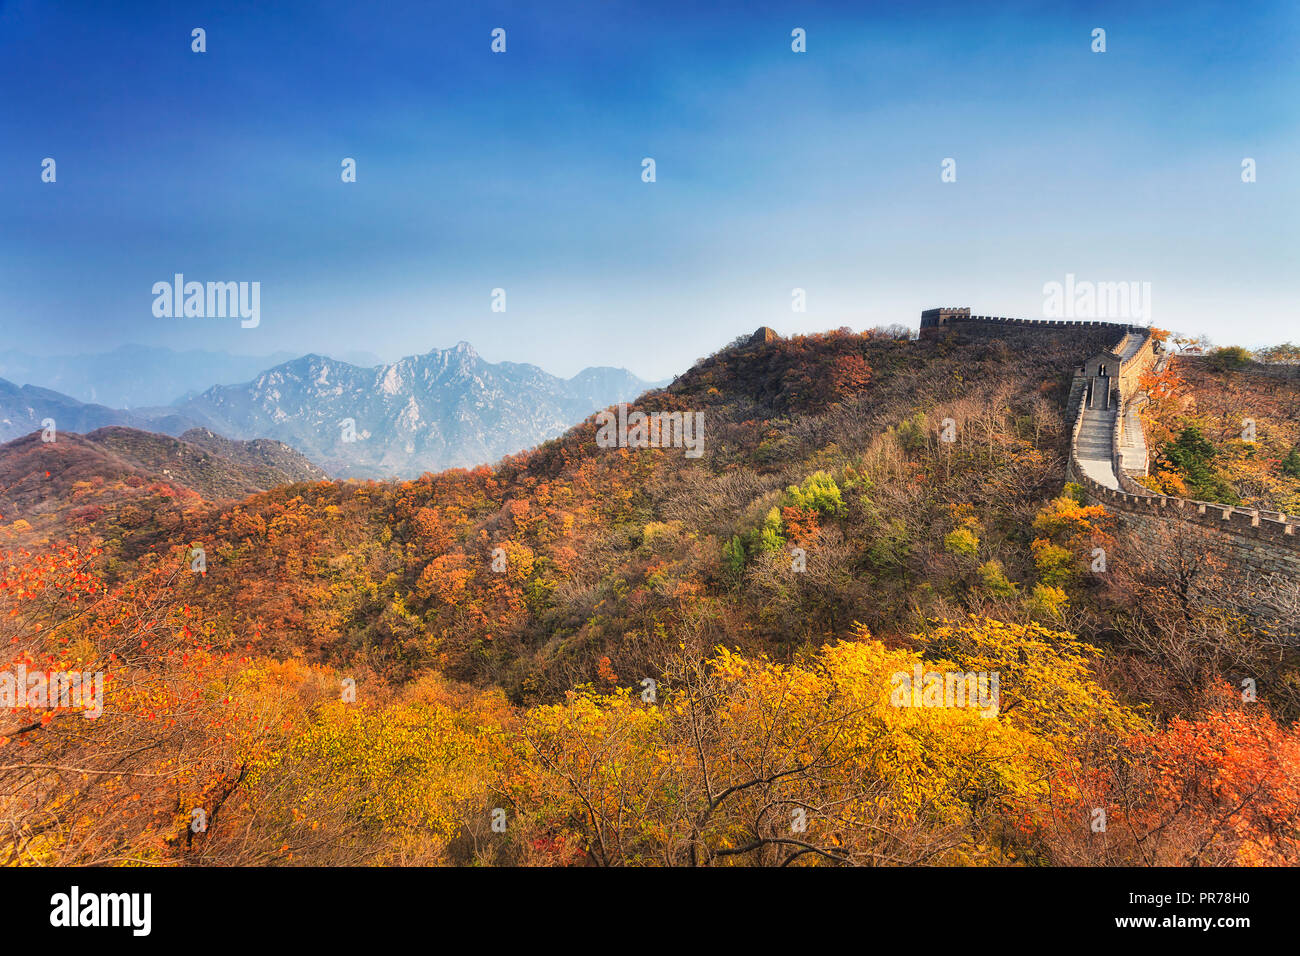 China The Great Wall ancient fortification construction from chinese emperor dynasties times autumn season yellow trees bright sunny days high in moun Stock Photo